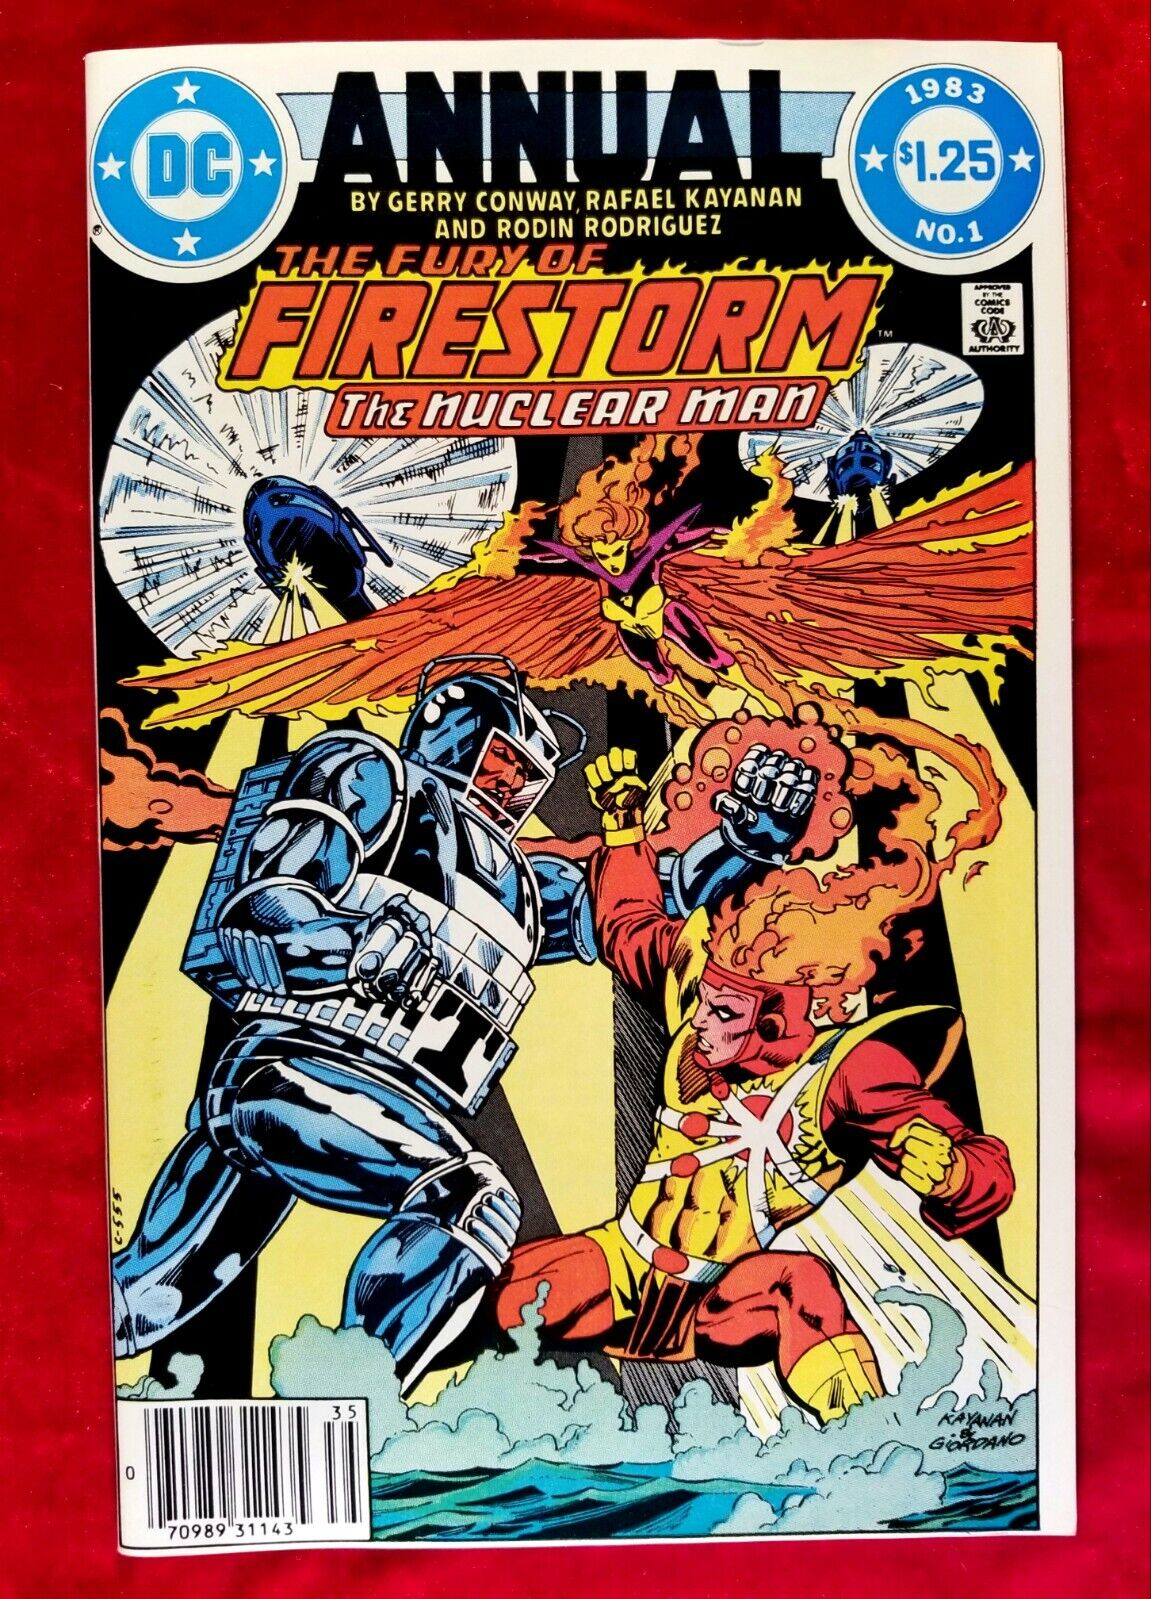 1983 The Fury of Firestorm The Nuclear Man #1 NEWSSTAND DC Annual High Grade 80s